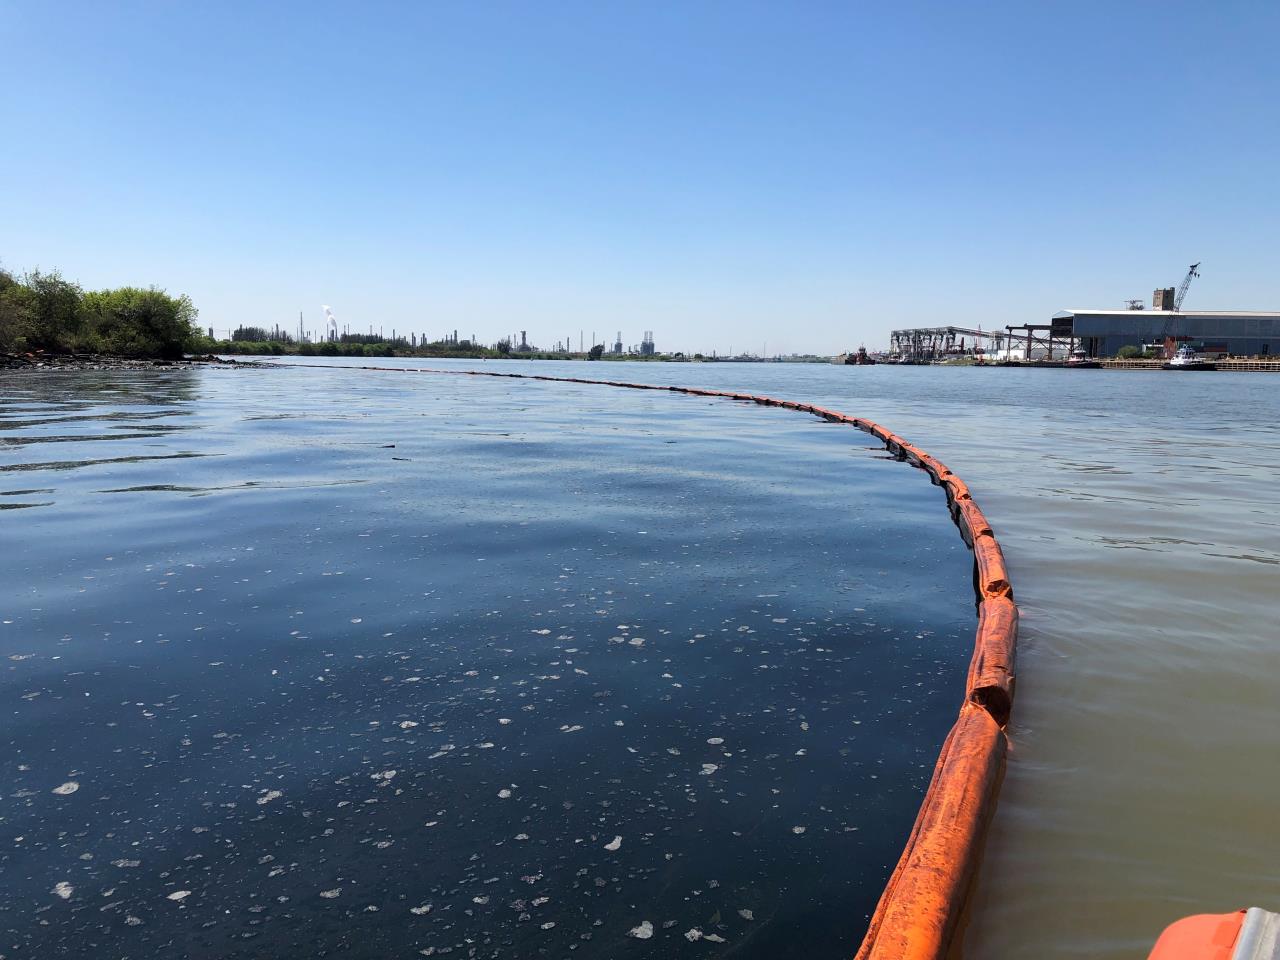 A pollution boom with oil in the water on one side.